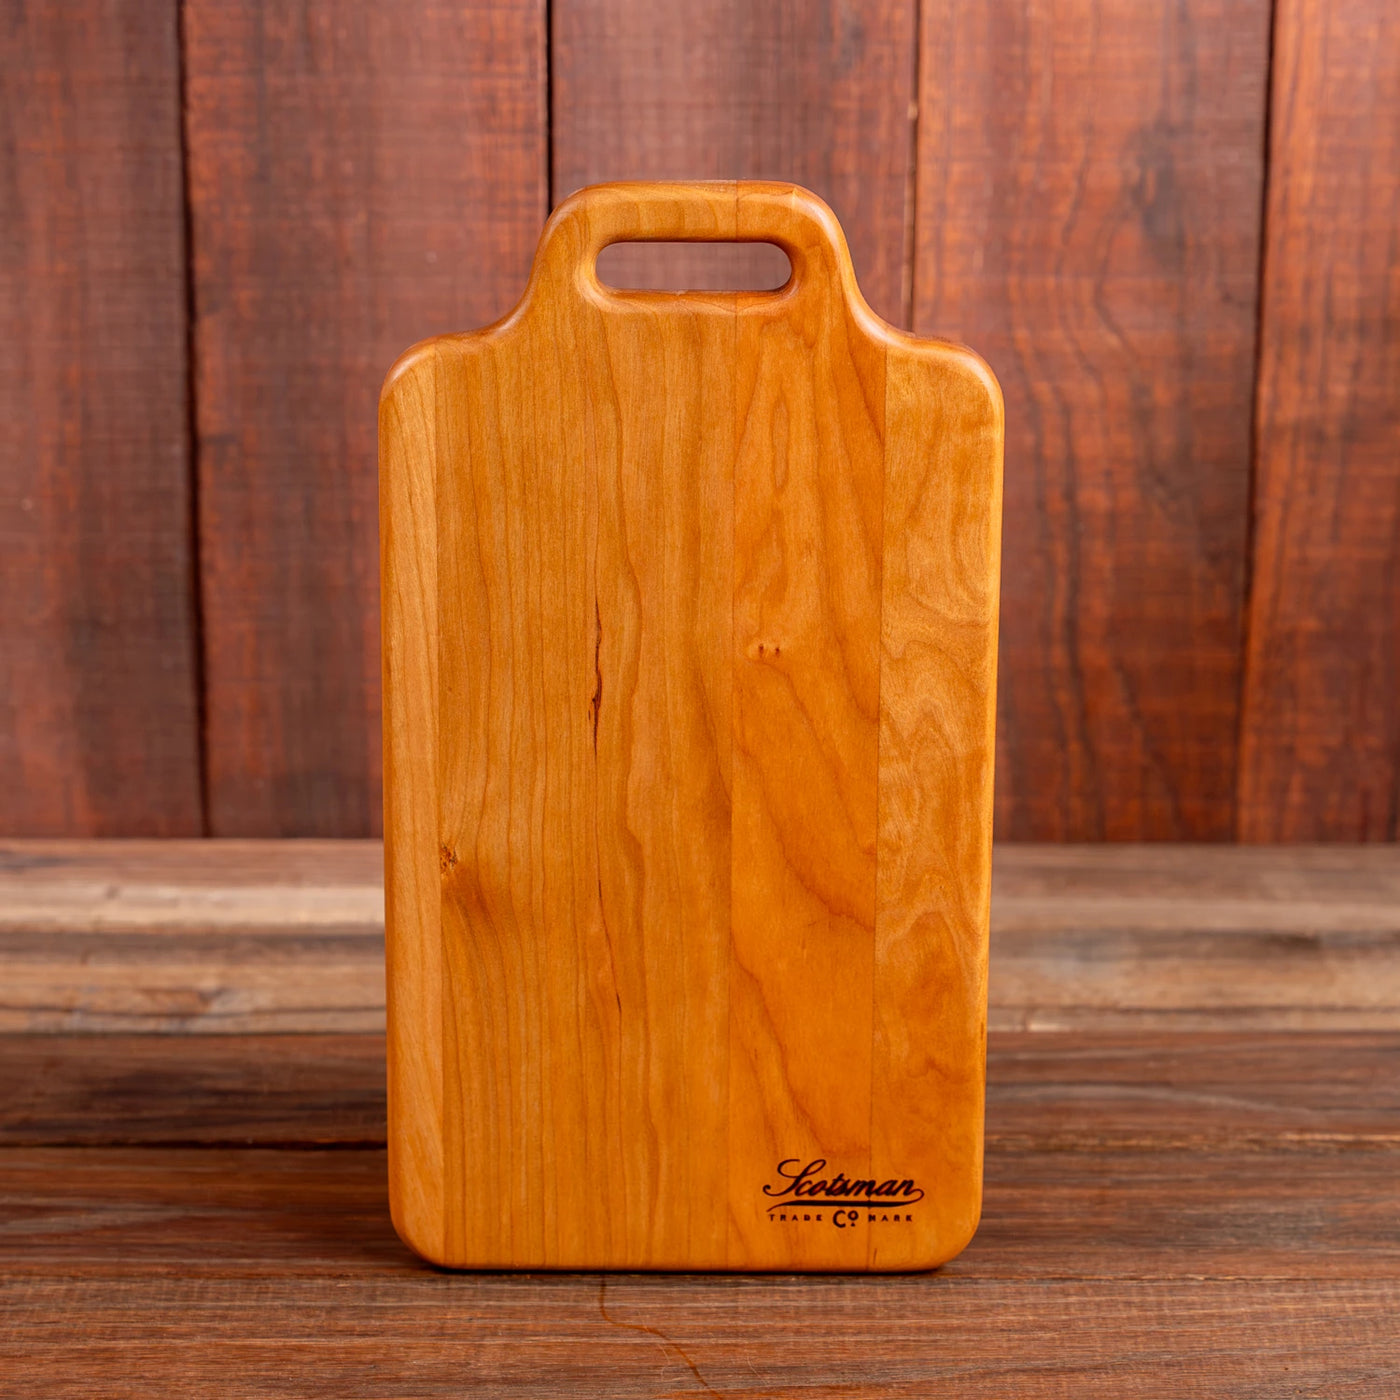 Cherry Rectangle Cheese Board Small